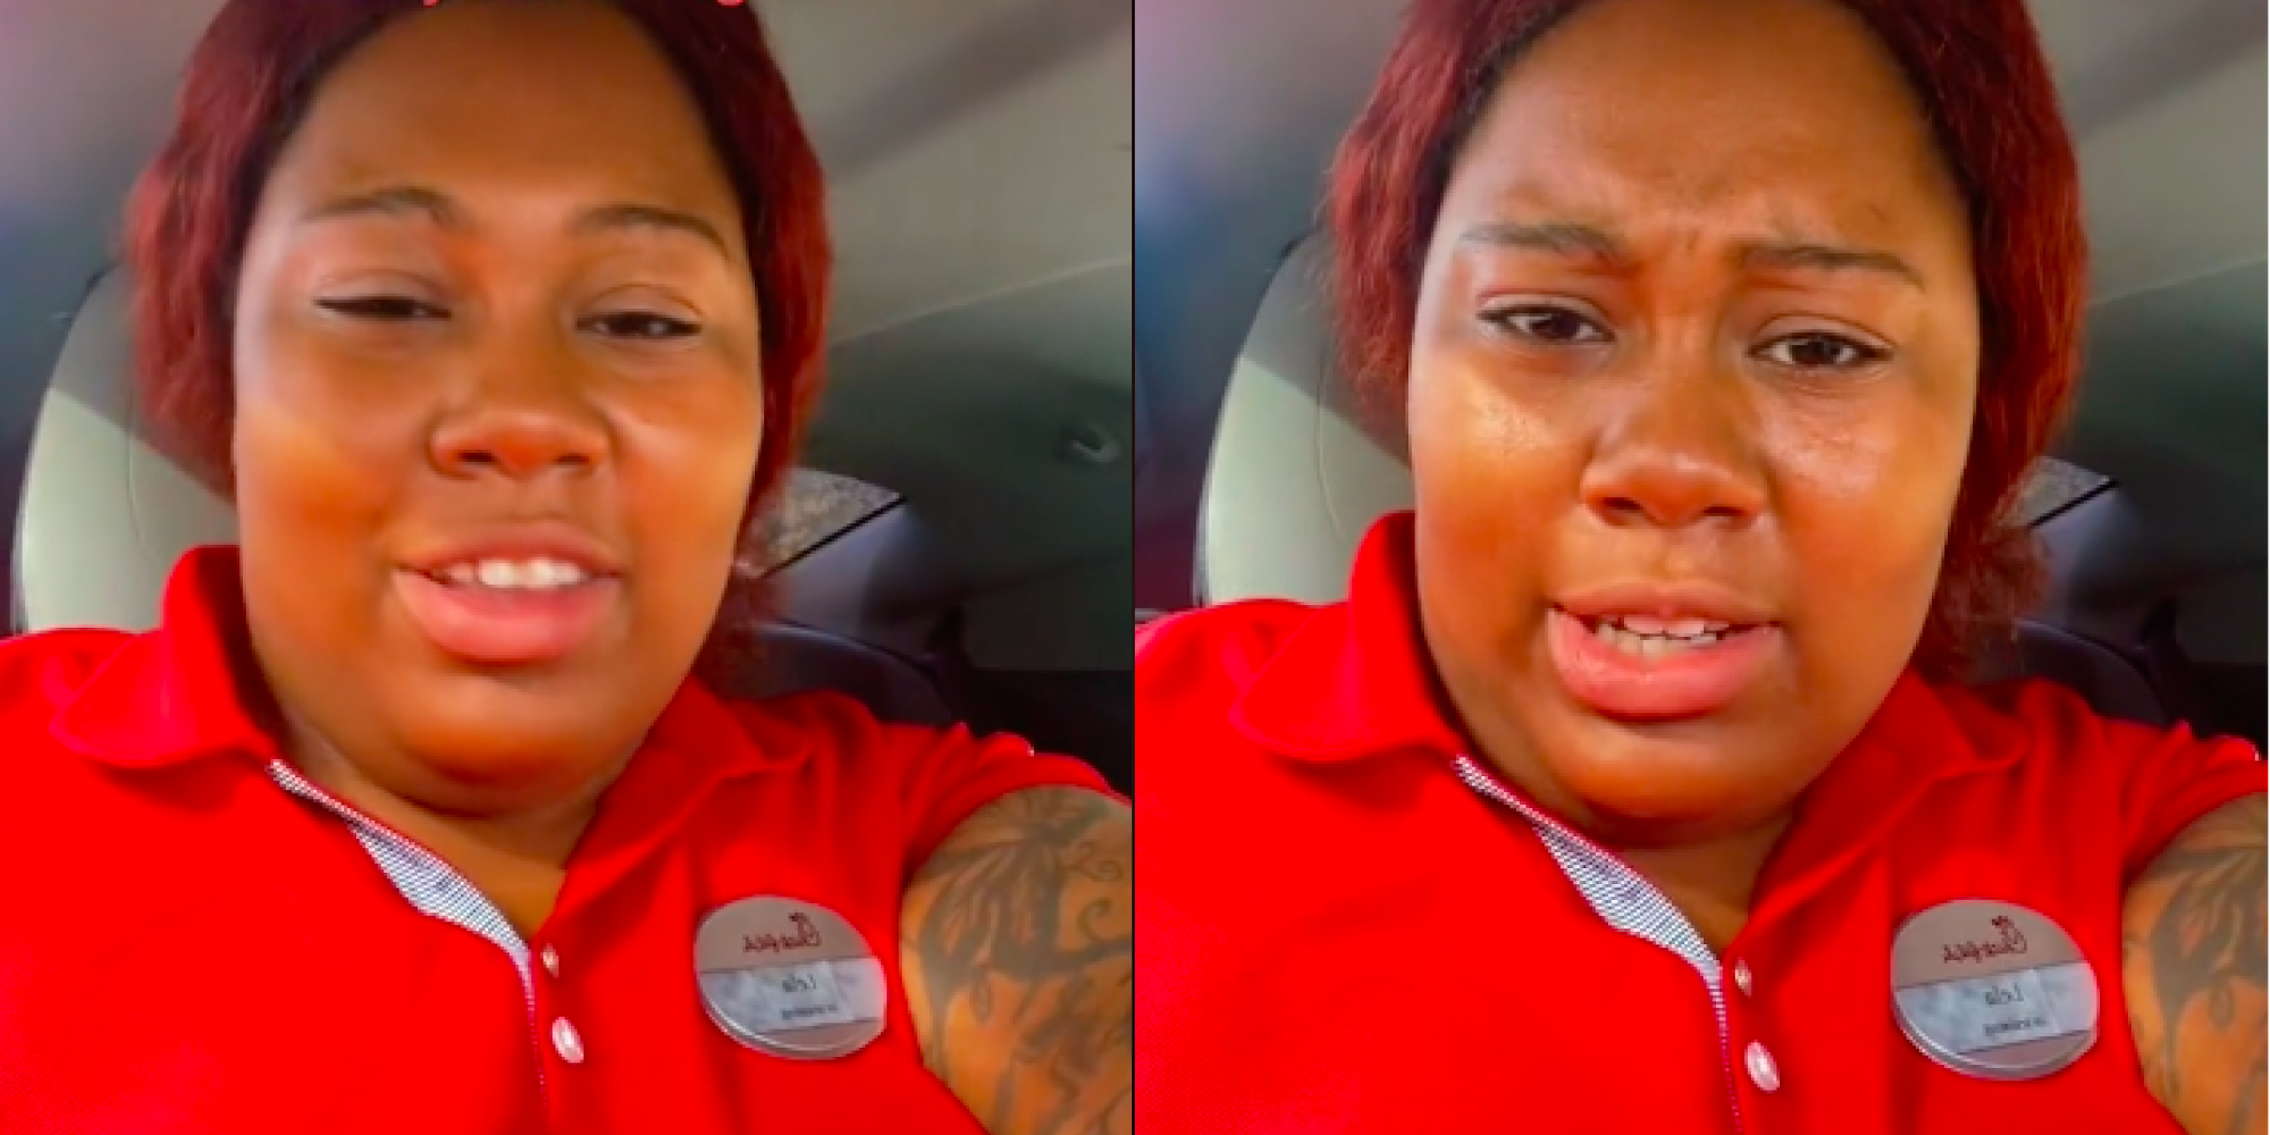 Chick-Fil-A worker talks about experience working there